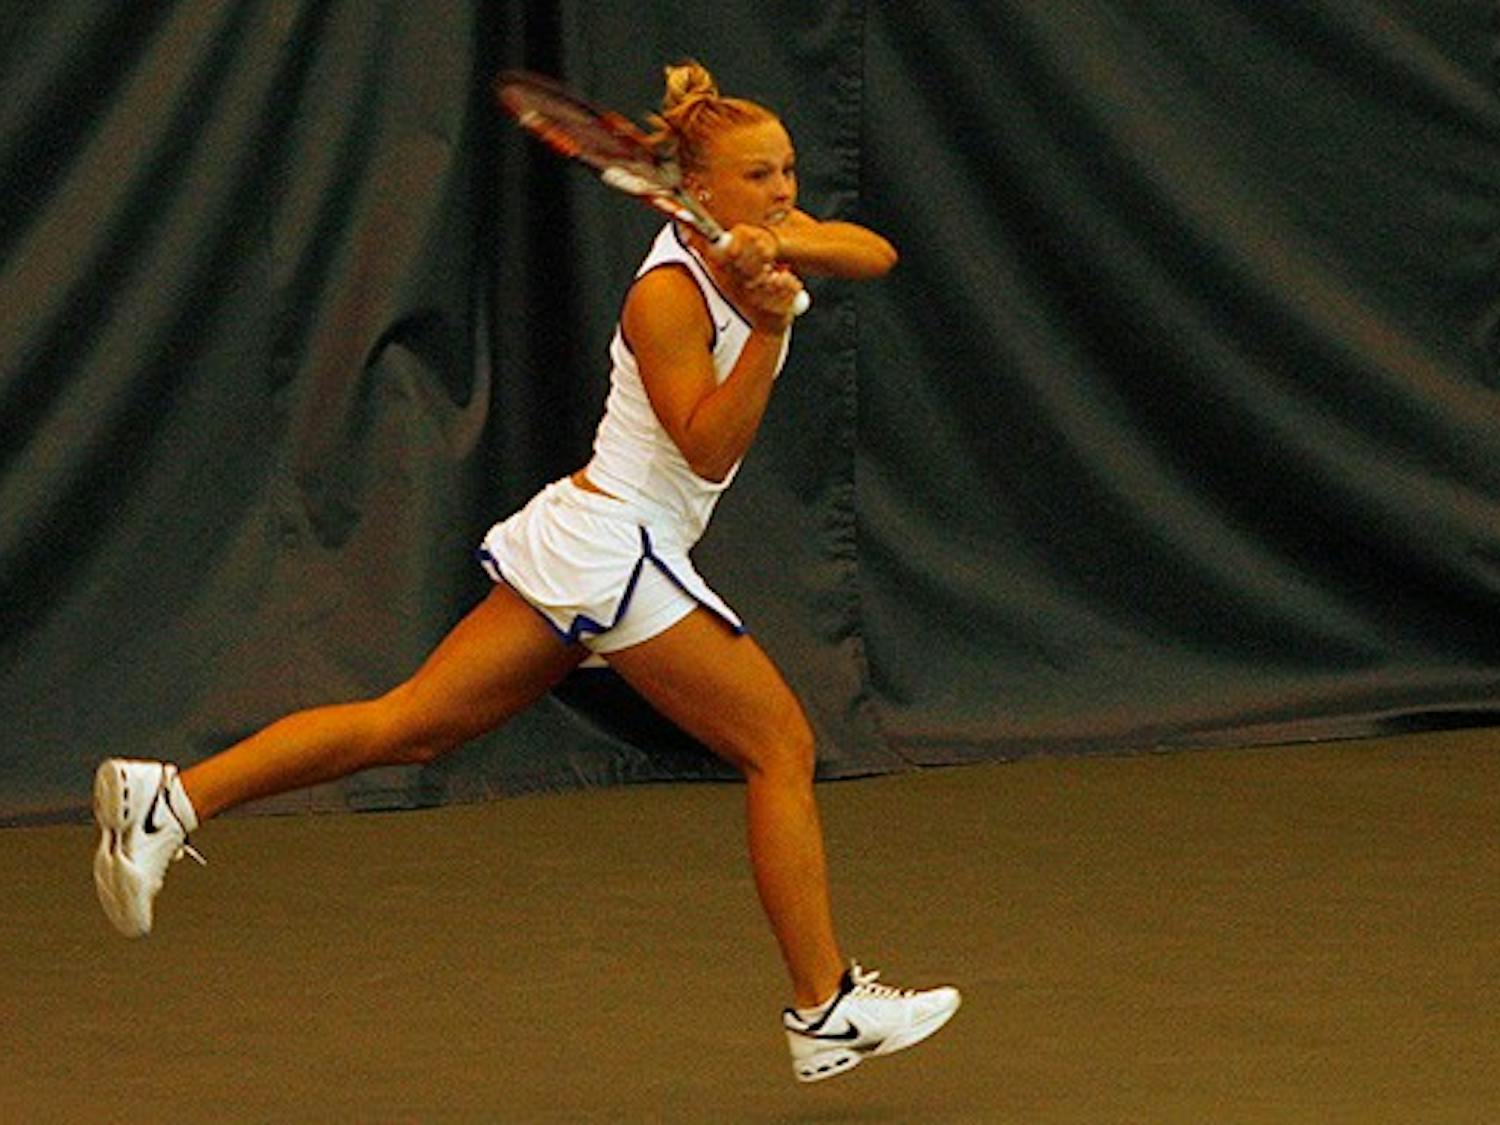 Mallory Cecil led the Blue Devils to the 2009 NCAA Championship, where she was crowned best singles player.